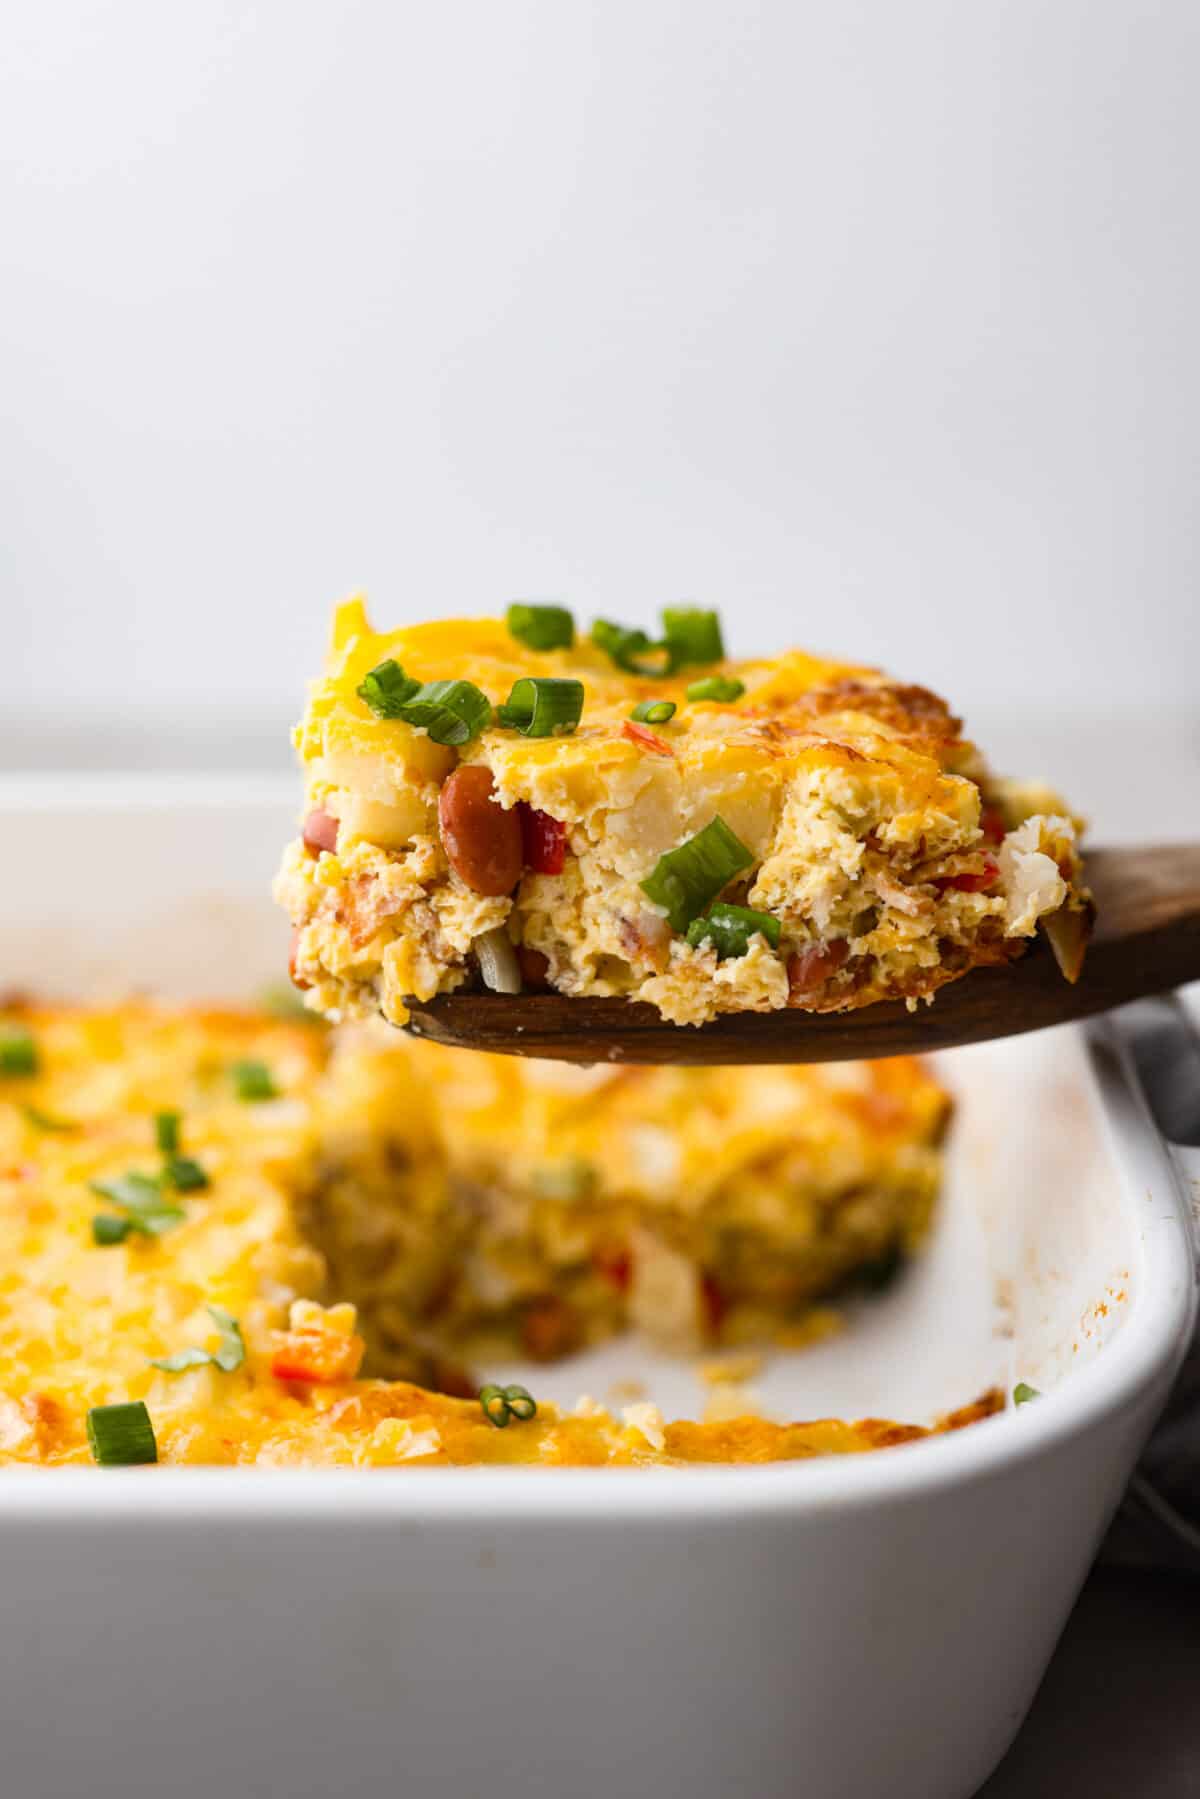 A slice of breakfast casserole being lifted out of the pan with a wooden spoon.